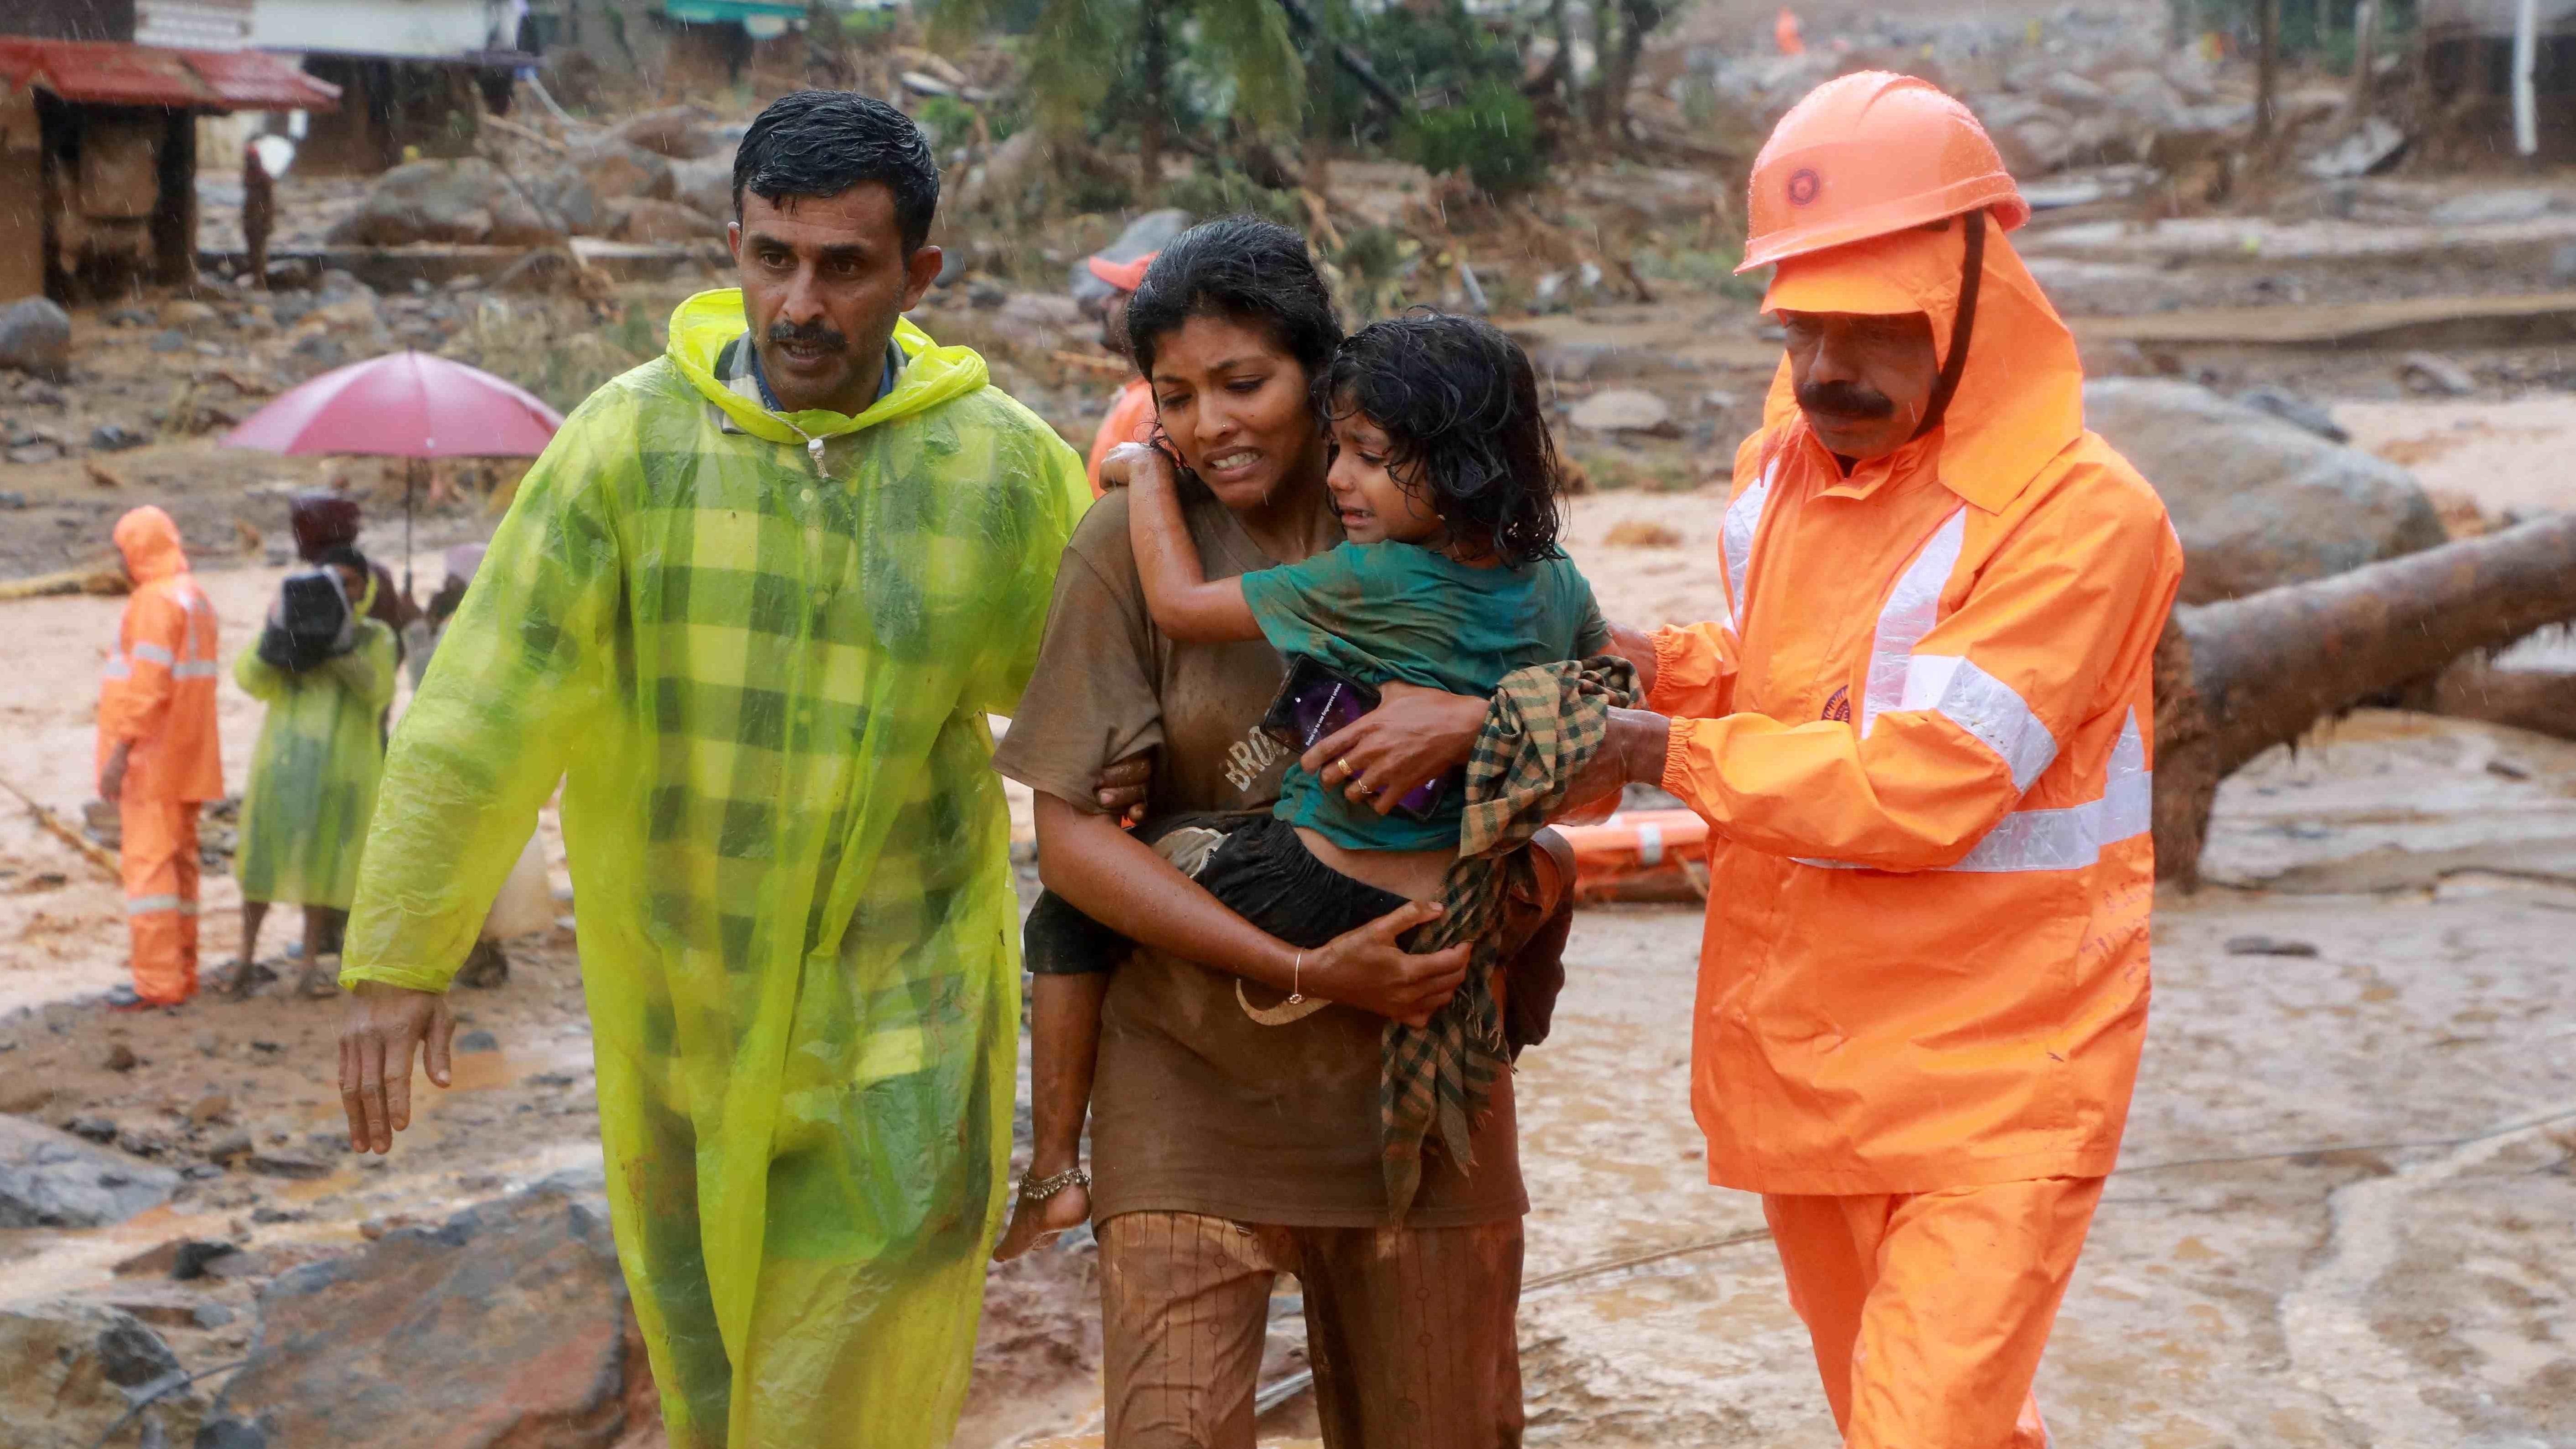 Eighty-nine killed, dozens trapped in India landslides